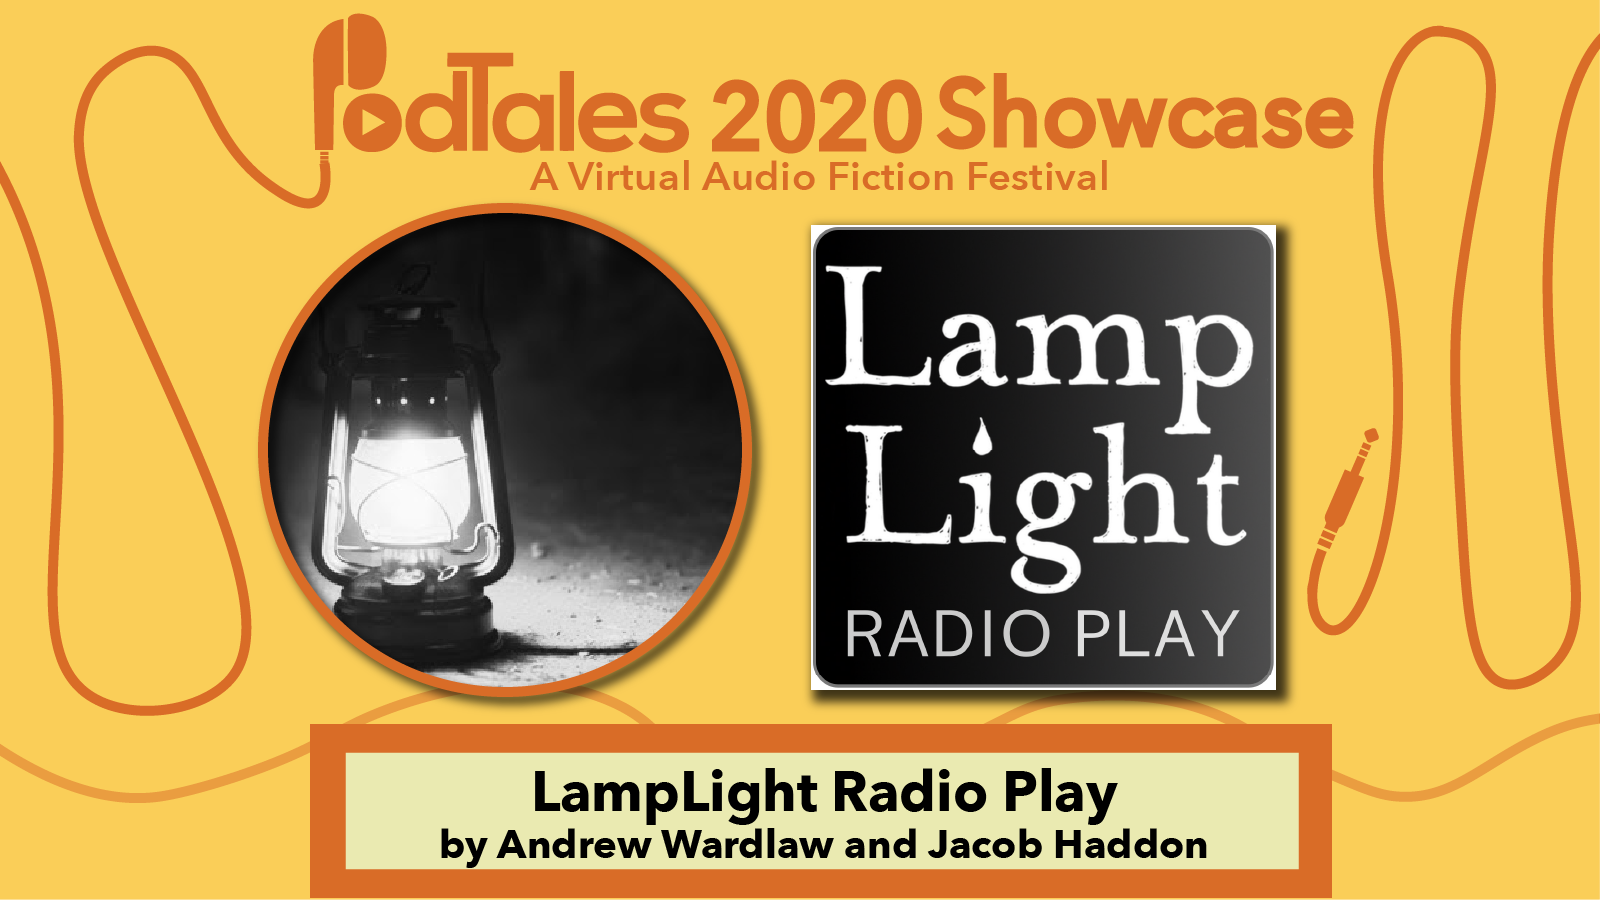 Text reading “PodTales 2020 Showcase: A Virtual Audio Fiction Festival”, Photo of an oil lamp, Show Art for LampLight Radio Play, Text reading “LampLight Radio Play by Andrew Wardlaw and Jacob Haddon”